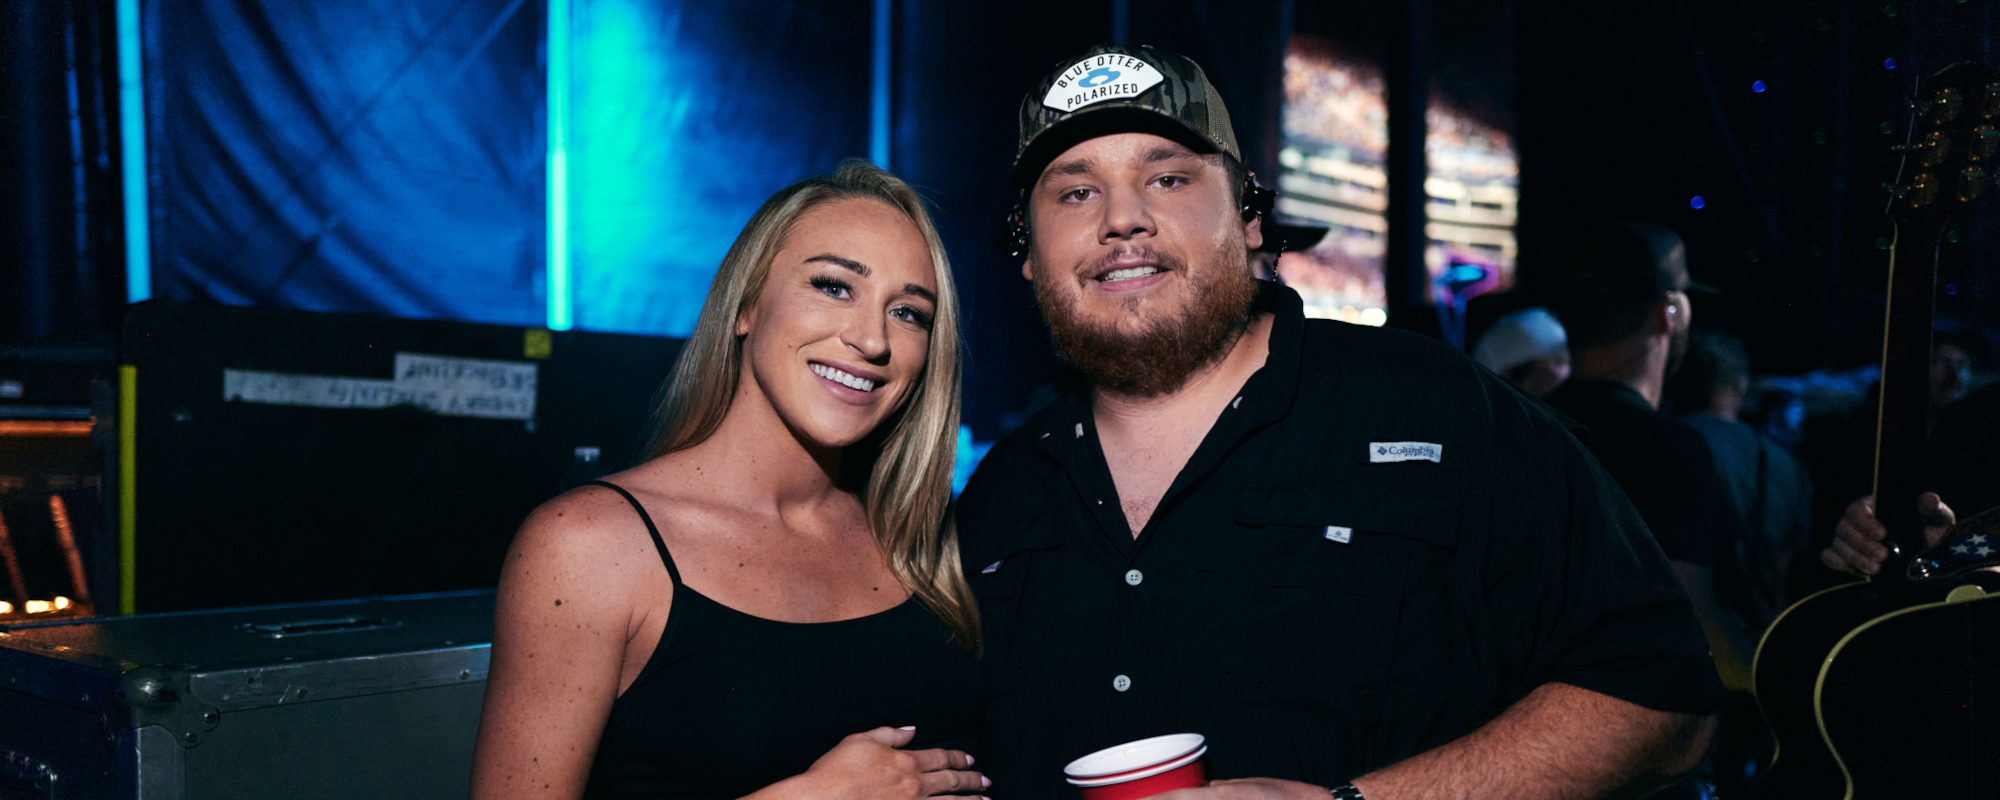 Luke Combs and Wife Expecting Second Child, Previews New Song “Take You With Me”